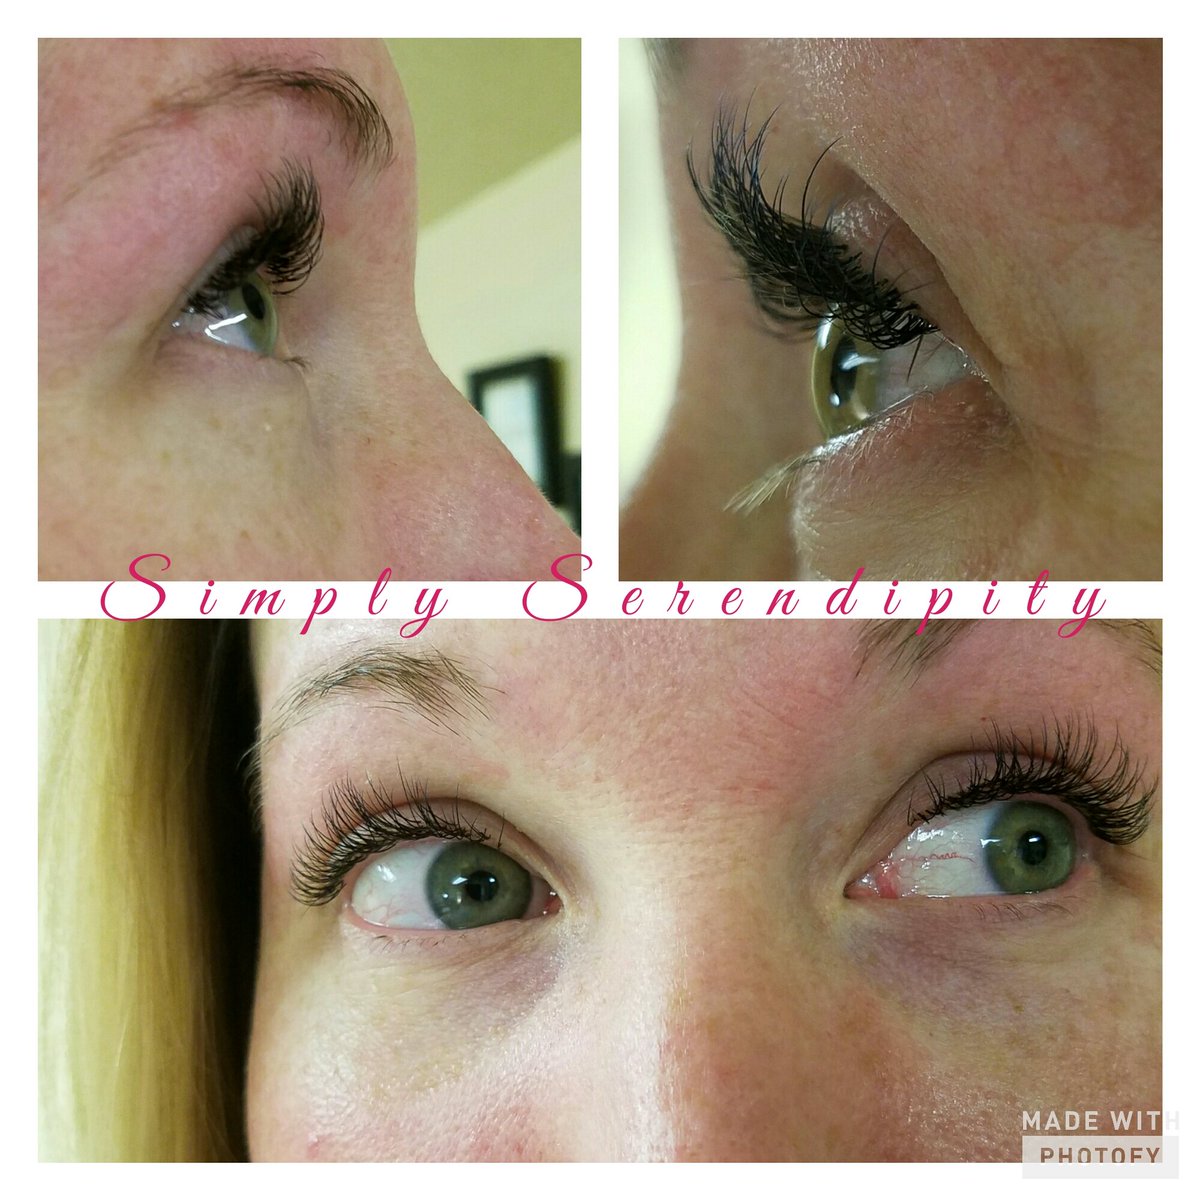 She was amazed at how her lashes looked...
#eyelashextensions  #simplyserendipity #dayspa #paulsvalleyoklahoma